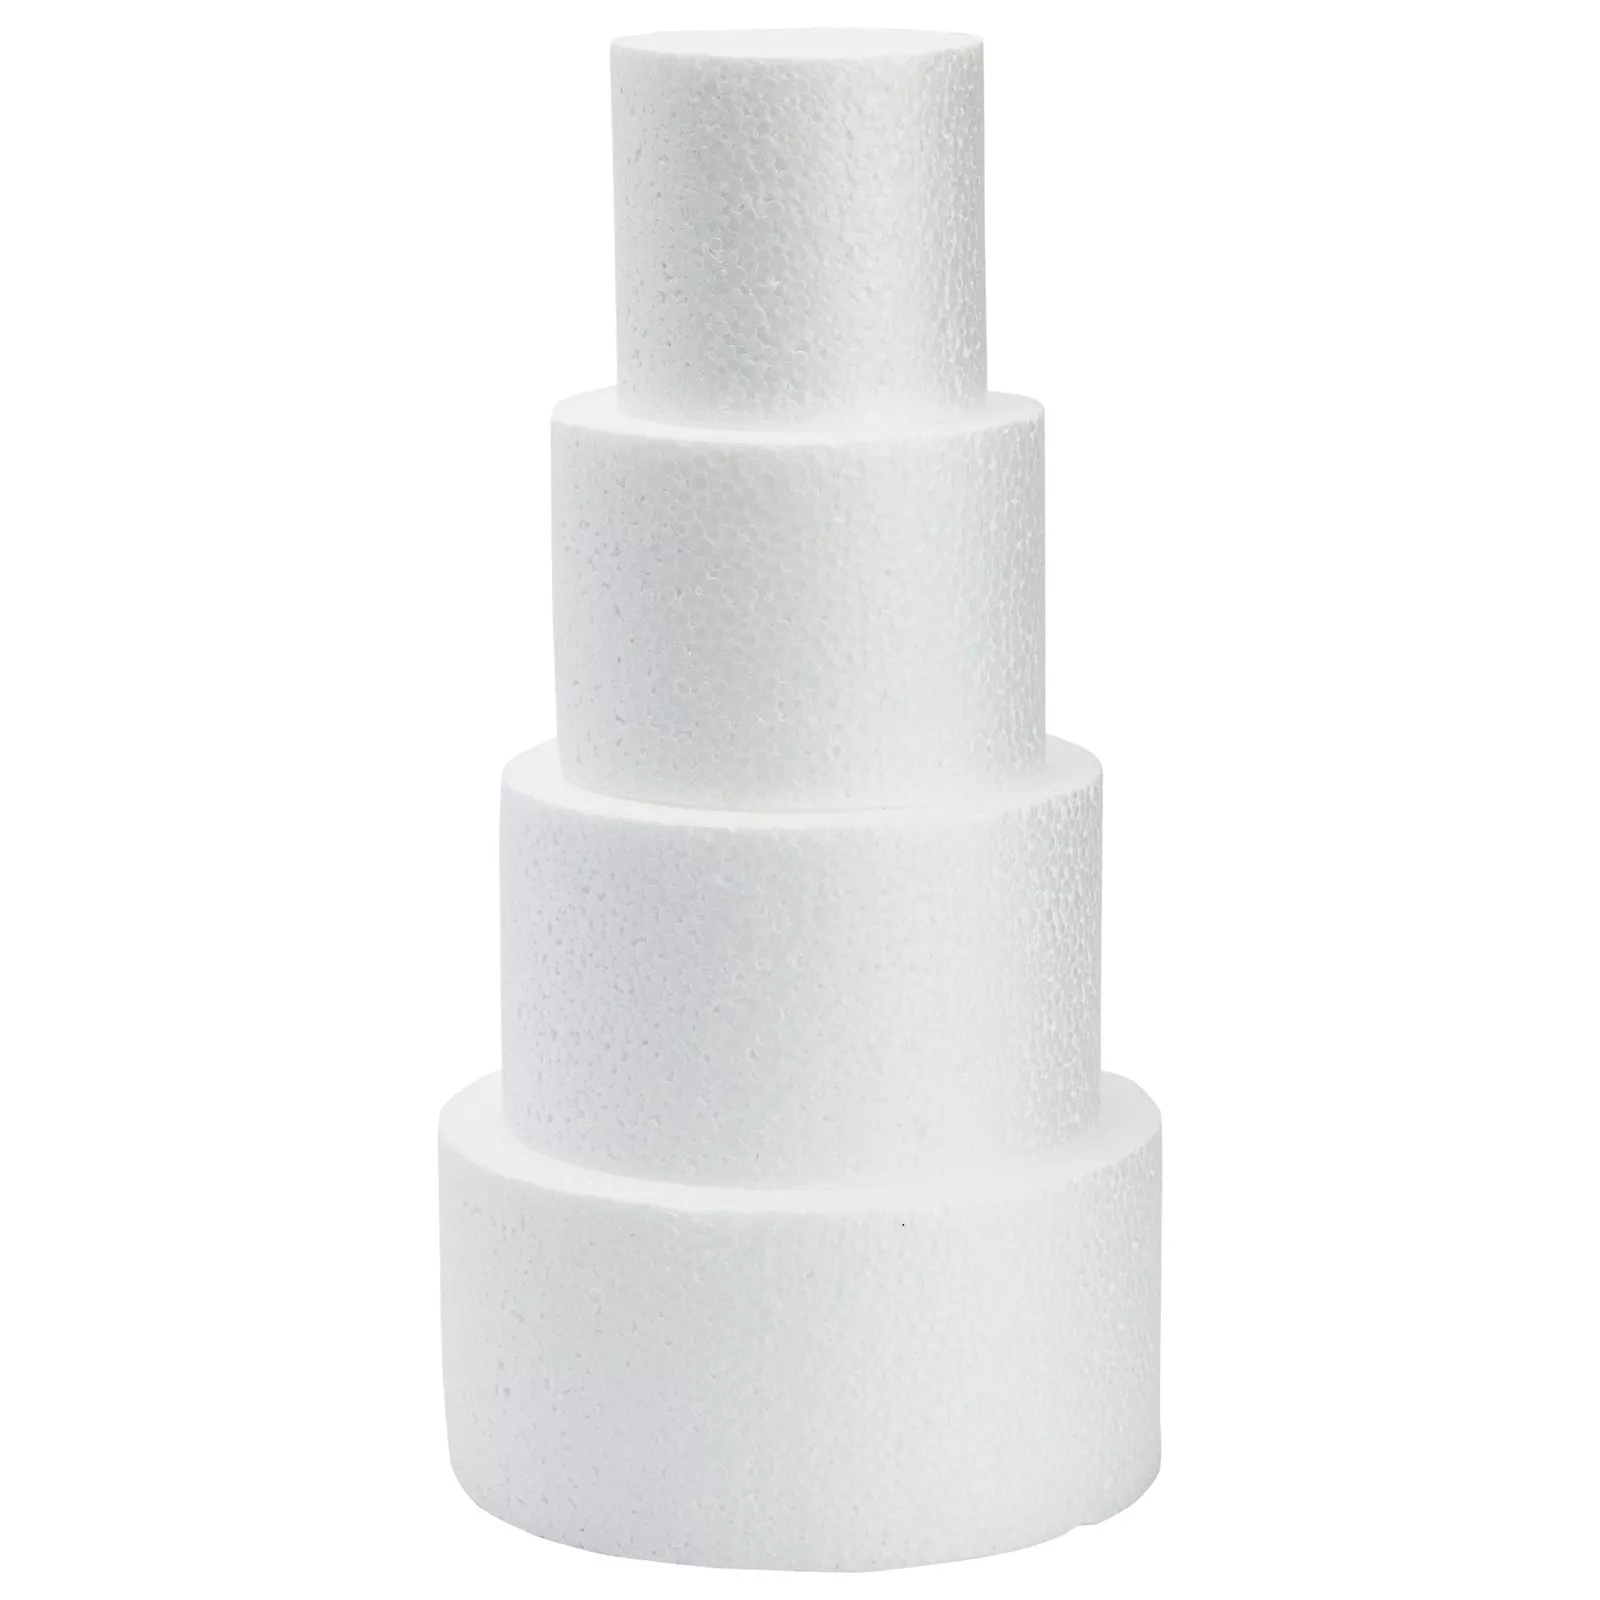 Juvale 4 Piece Foam Cake Rounds for Wedding, Birthday, Baby Shower, 3-6 in, White